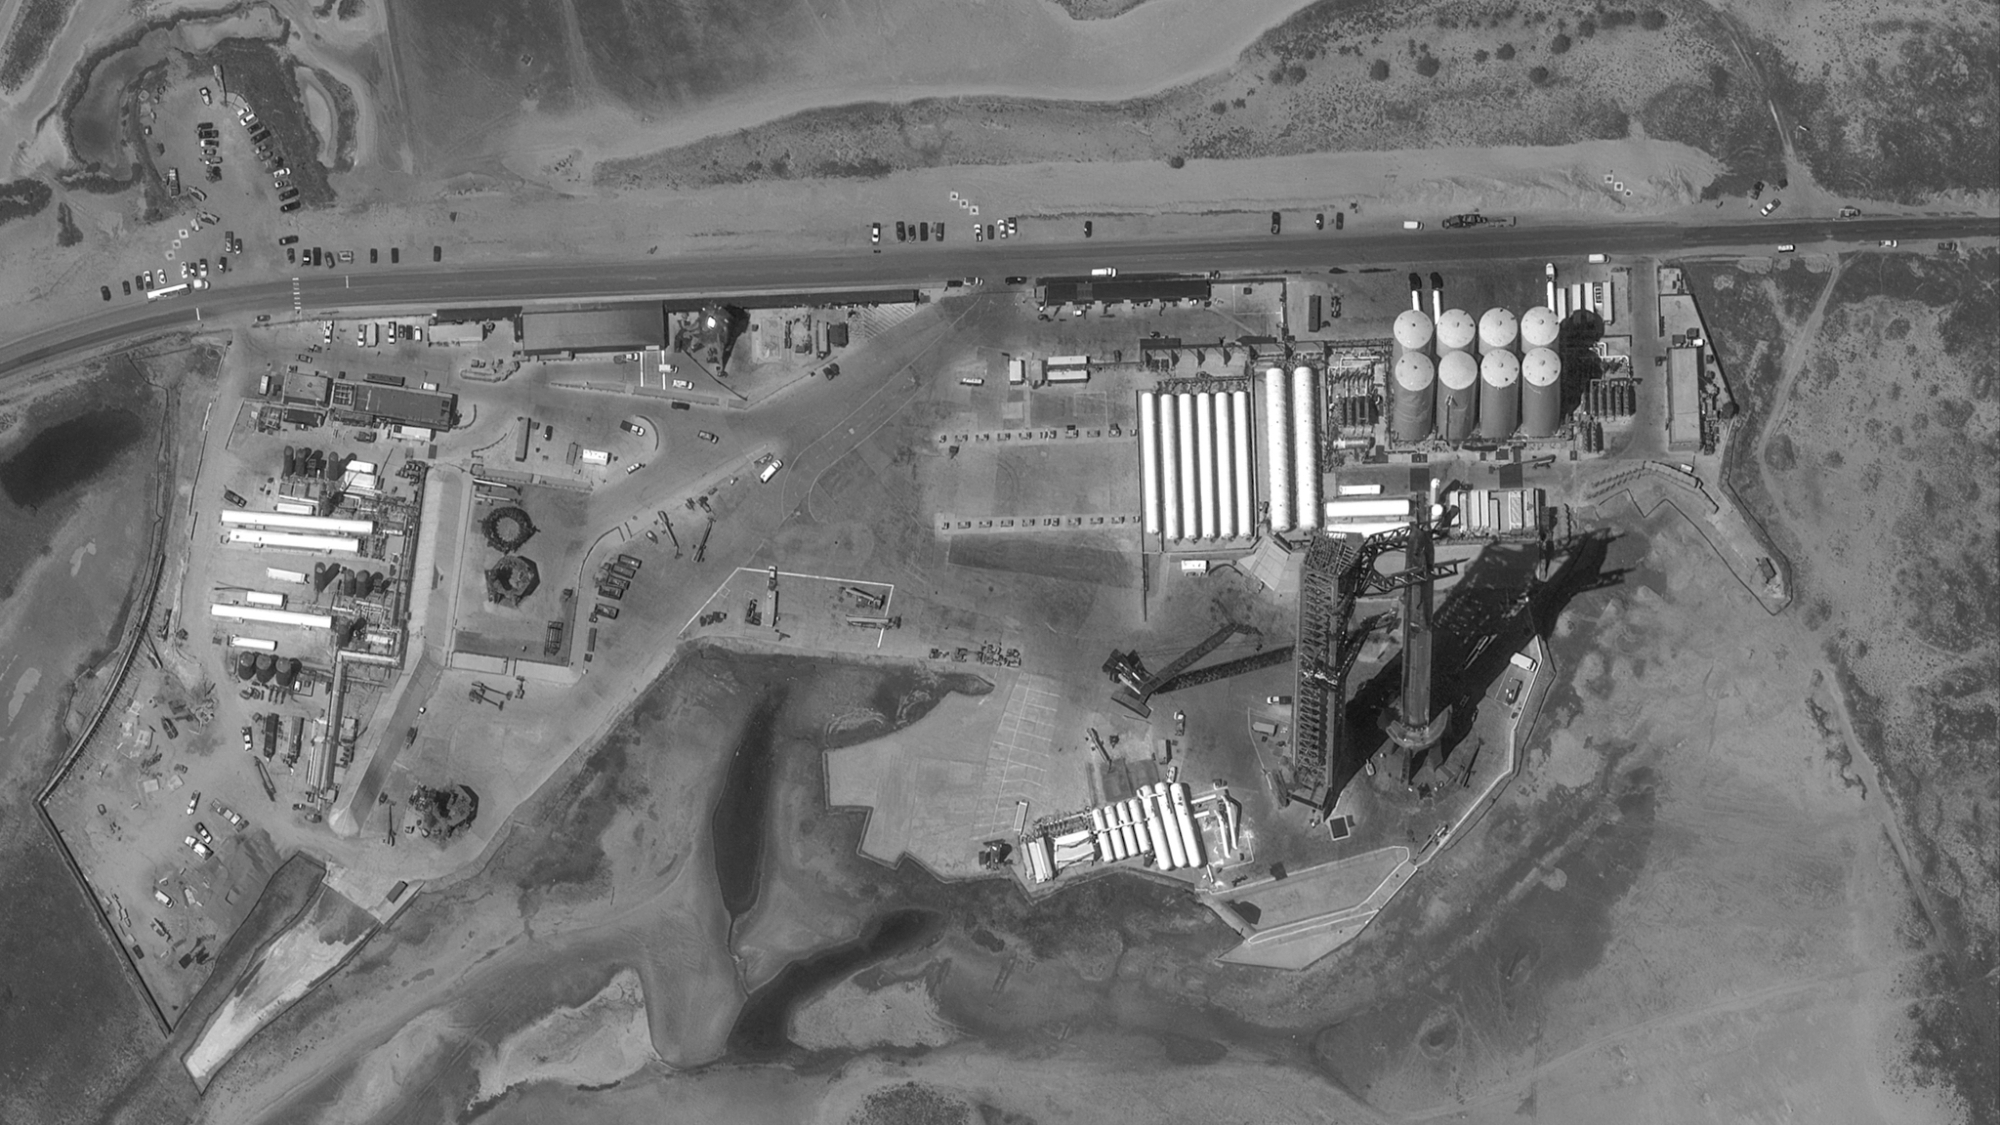 black-and-white satellite photo of a large rocket standing next to a launch tower with dirt and white buildings in the background